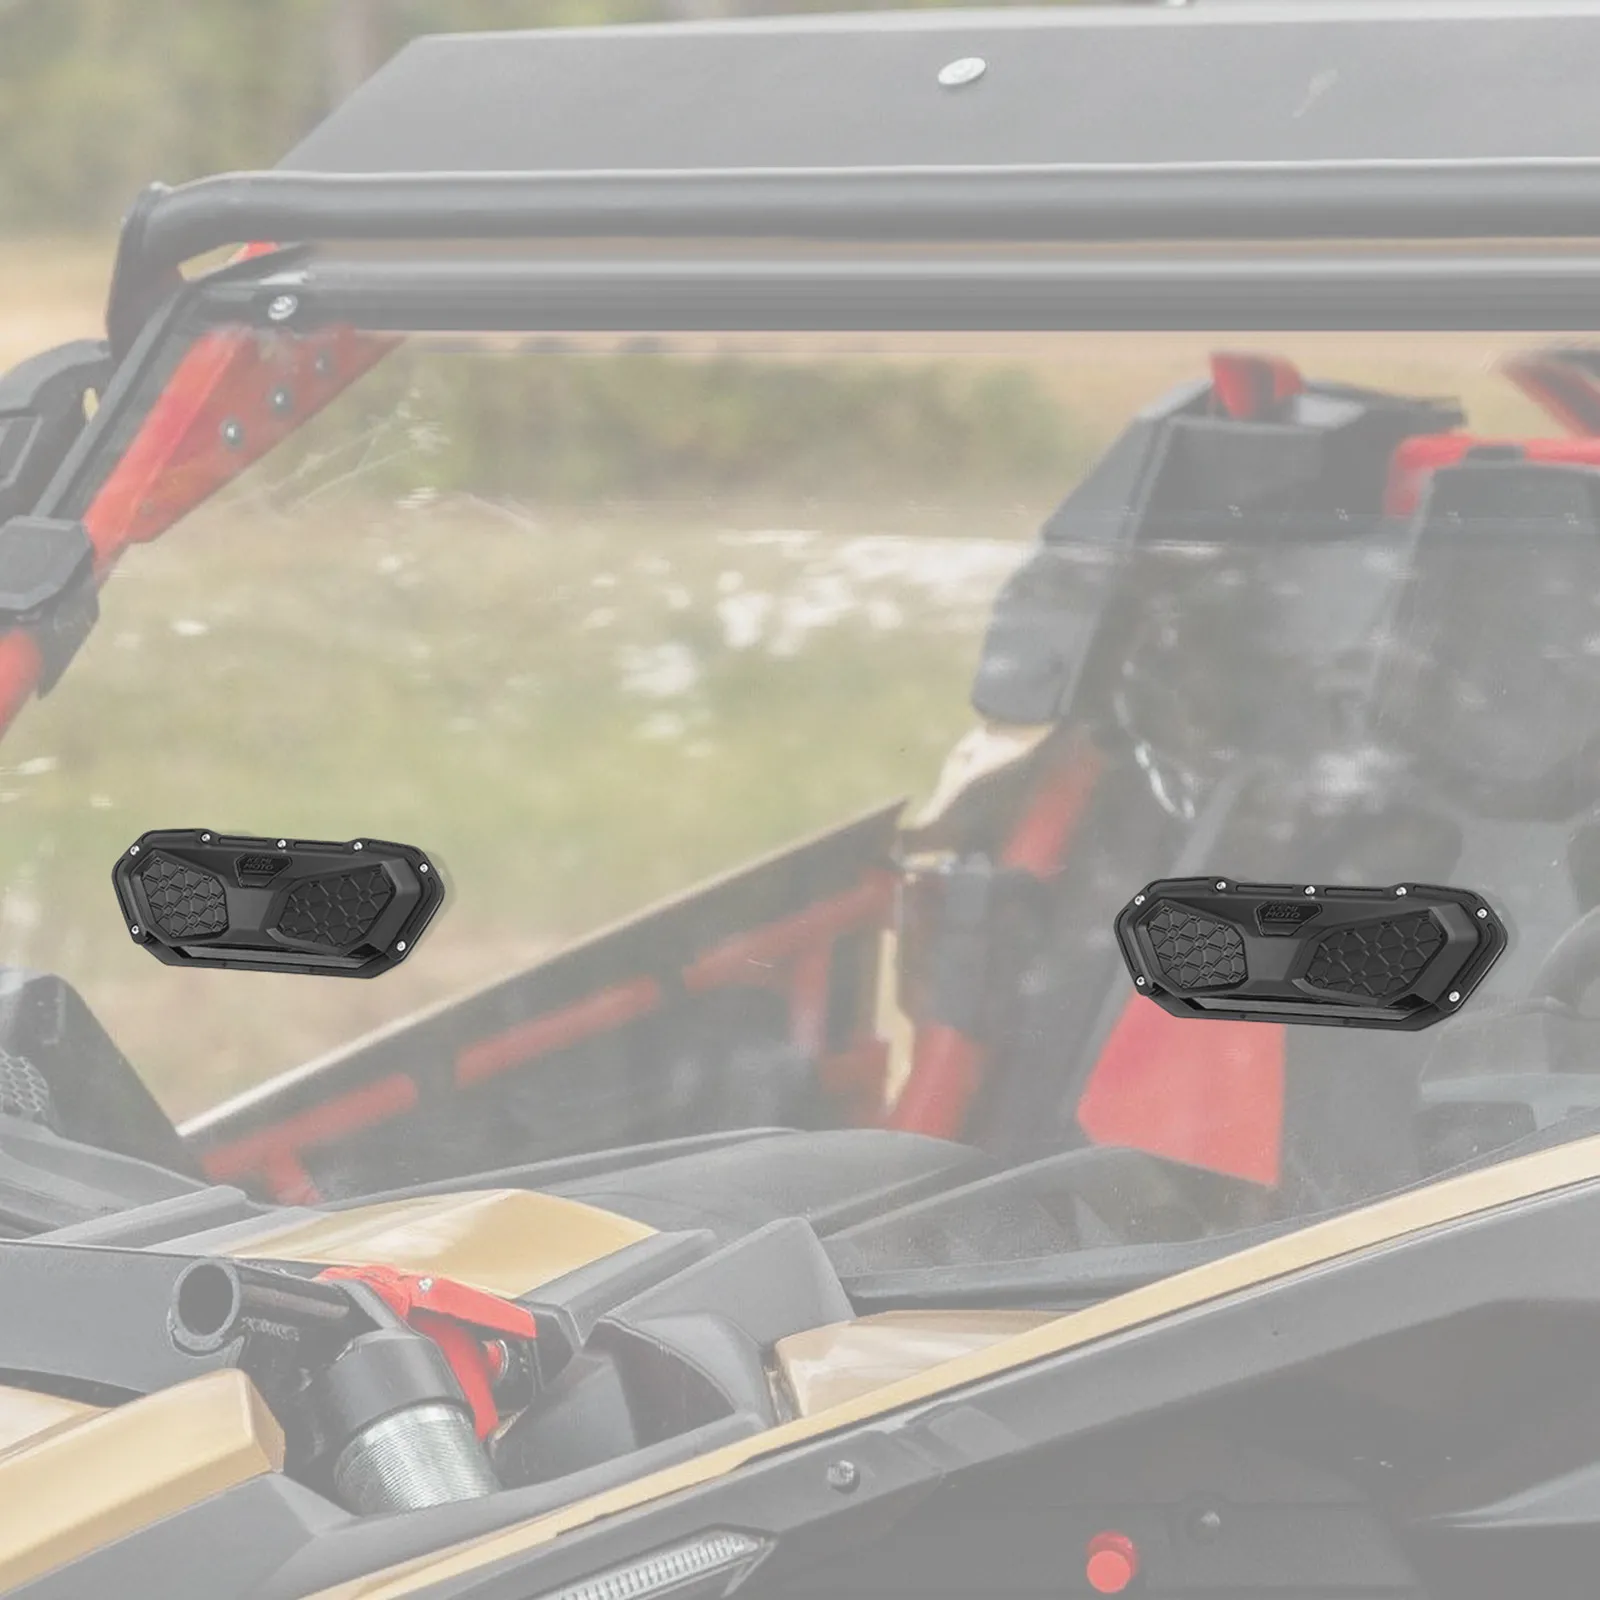 UTV Windshield Roof Vent for Can-am Maverick X3 Compatible with Polaris RZR for Kawasaki Teryx Install Kit Defrost Defog self install utv windshield vent kit includes 2 vents for hard coated polycarbonate windshields